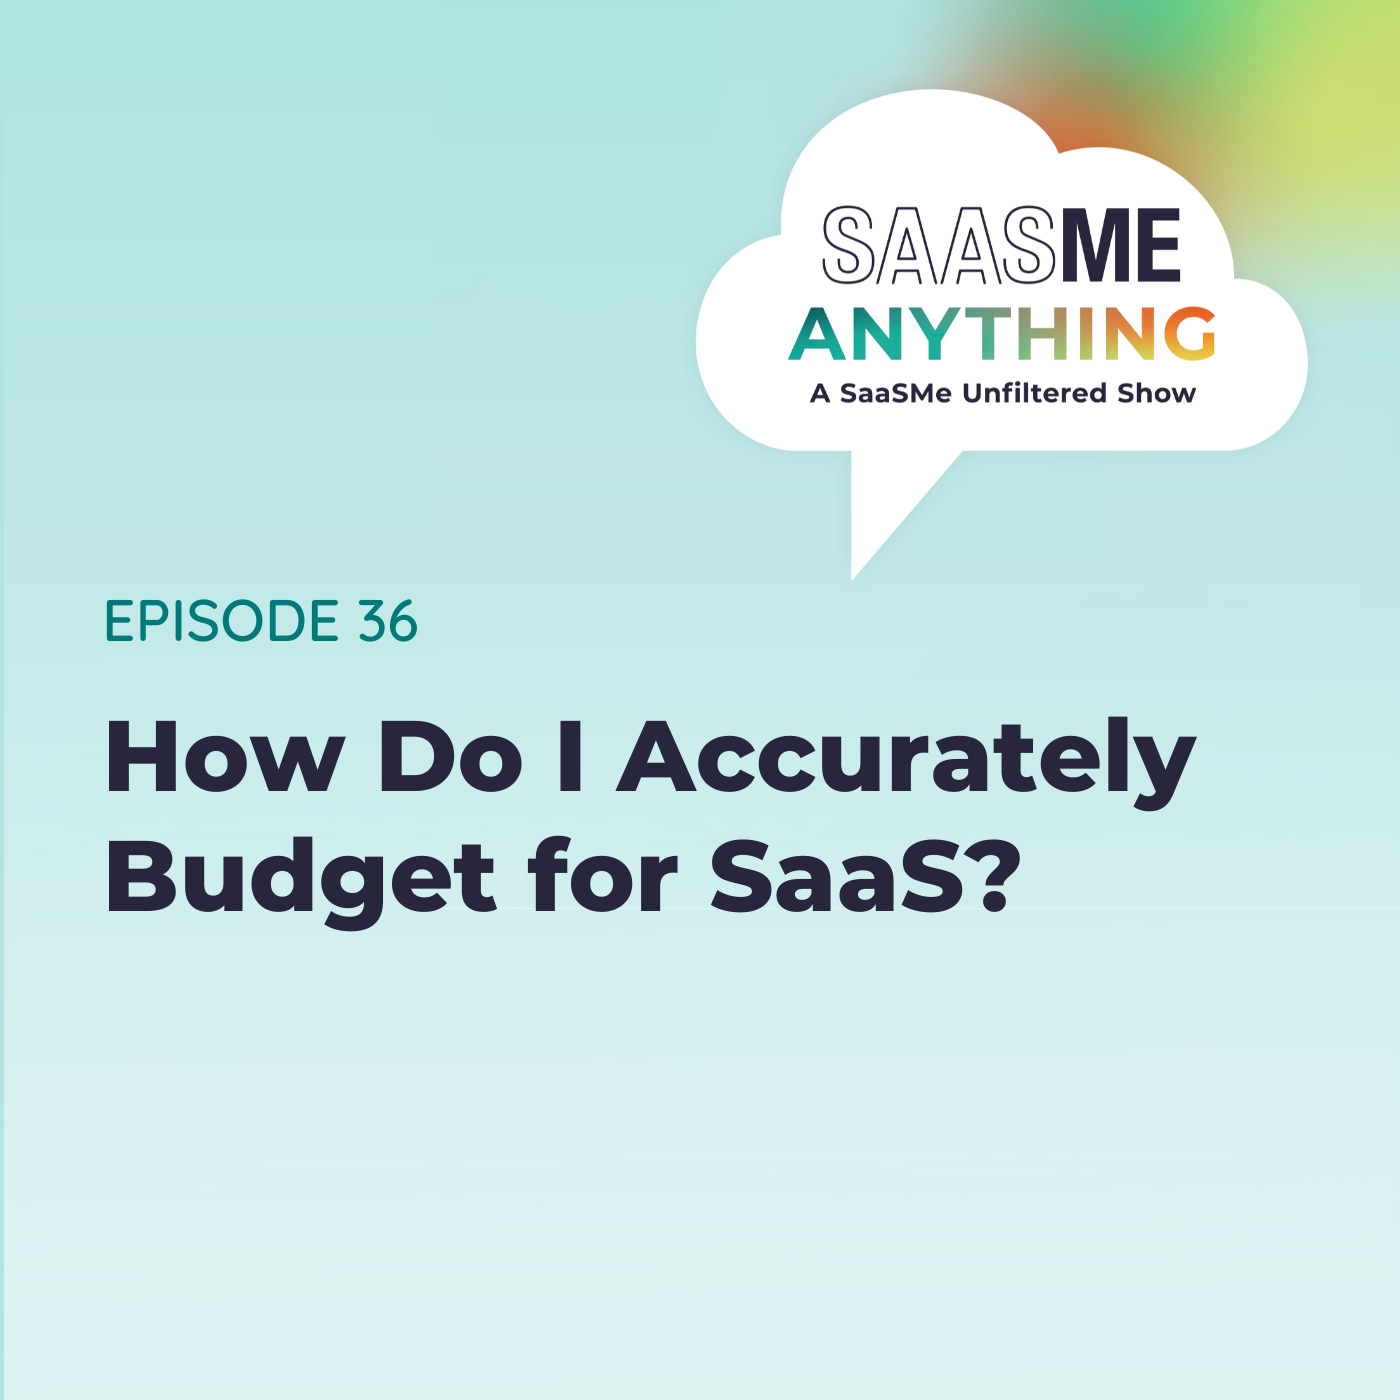 How Do I Accurately Budget for SaaS?